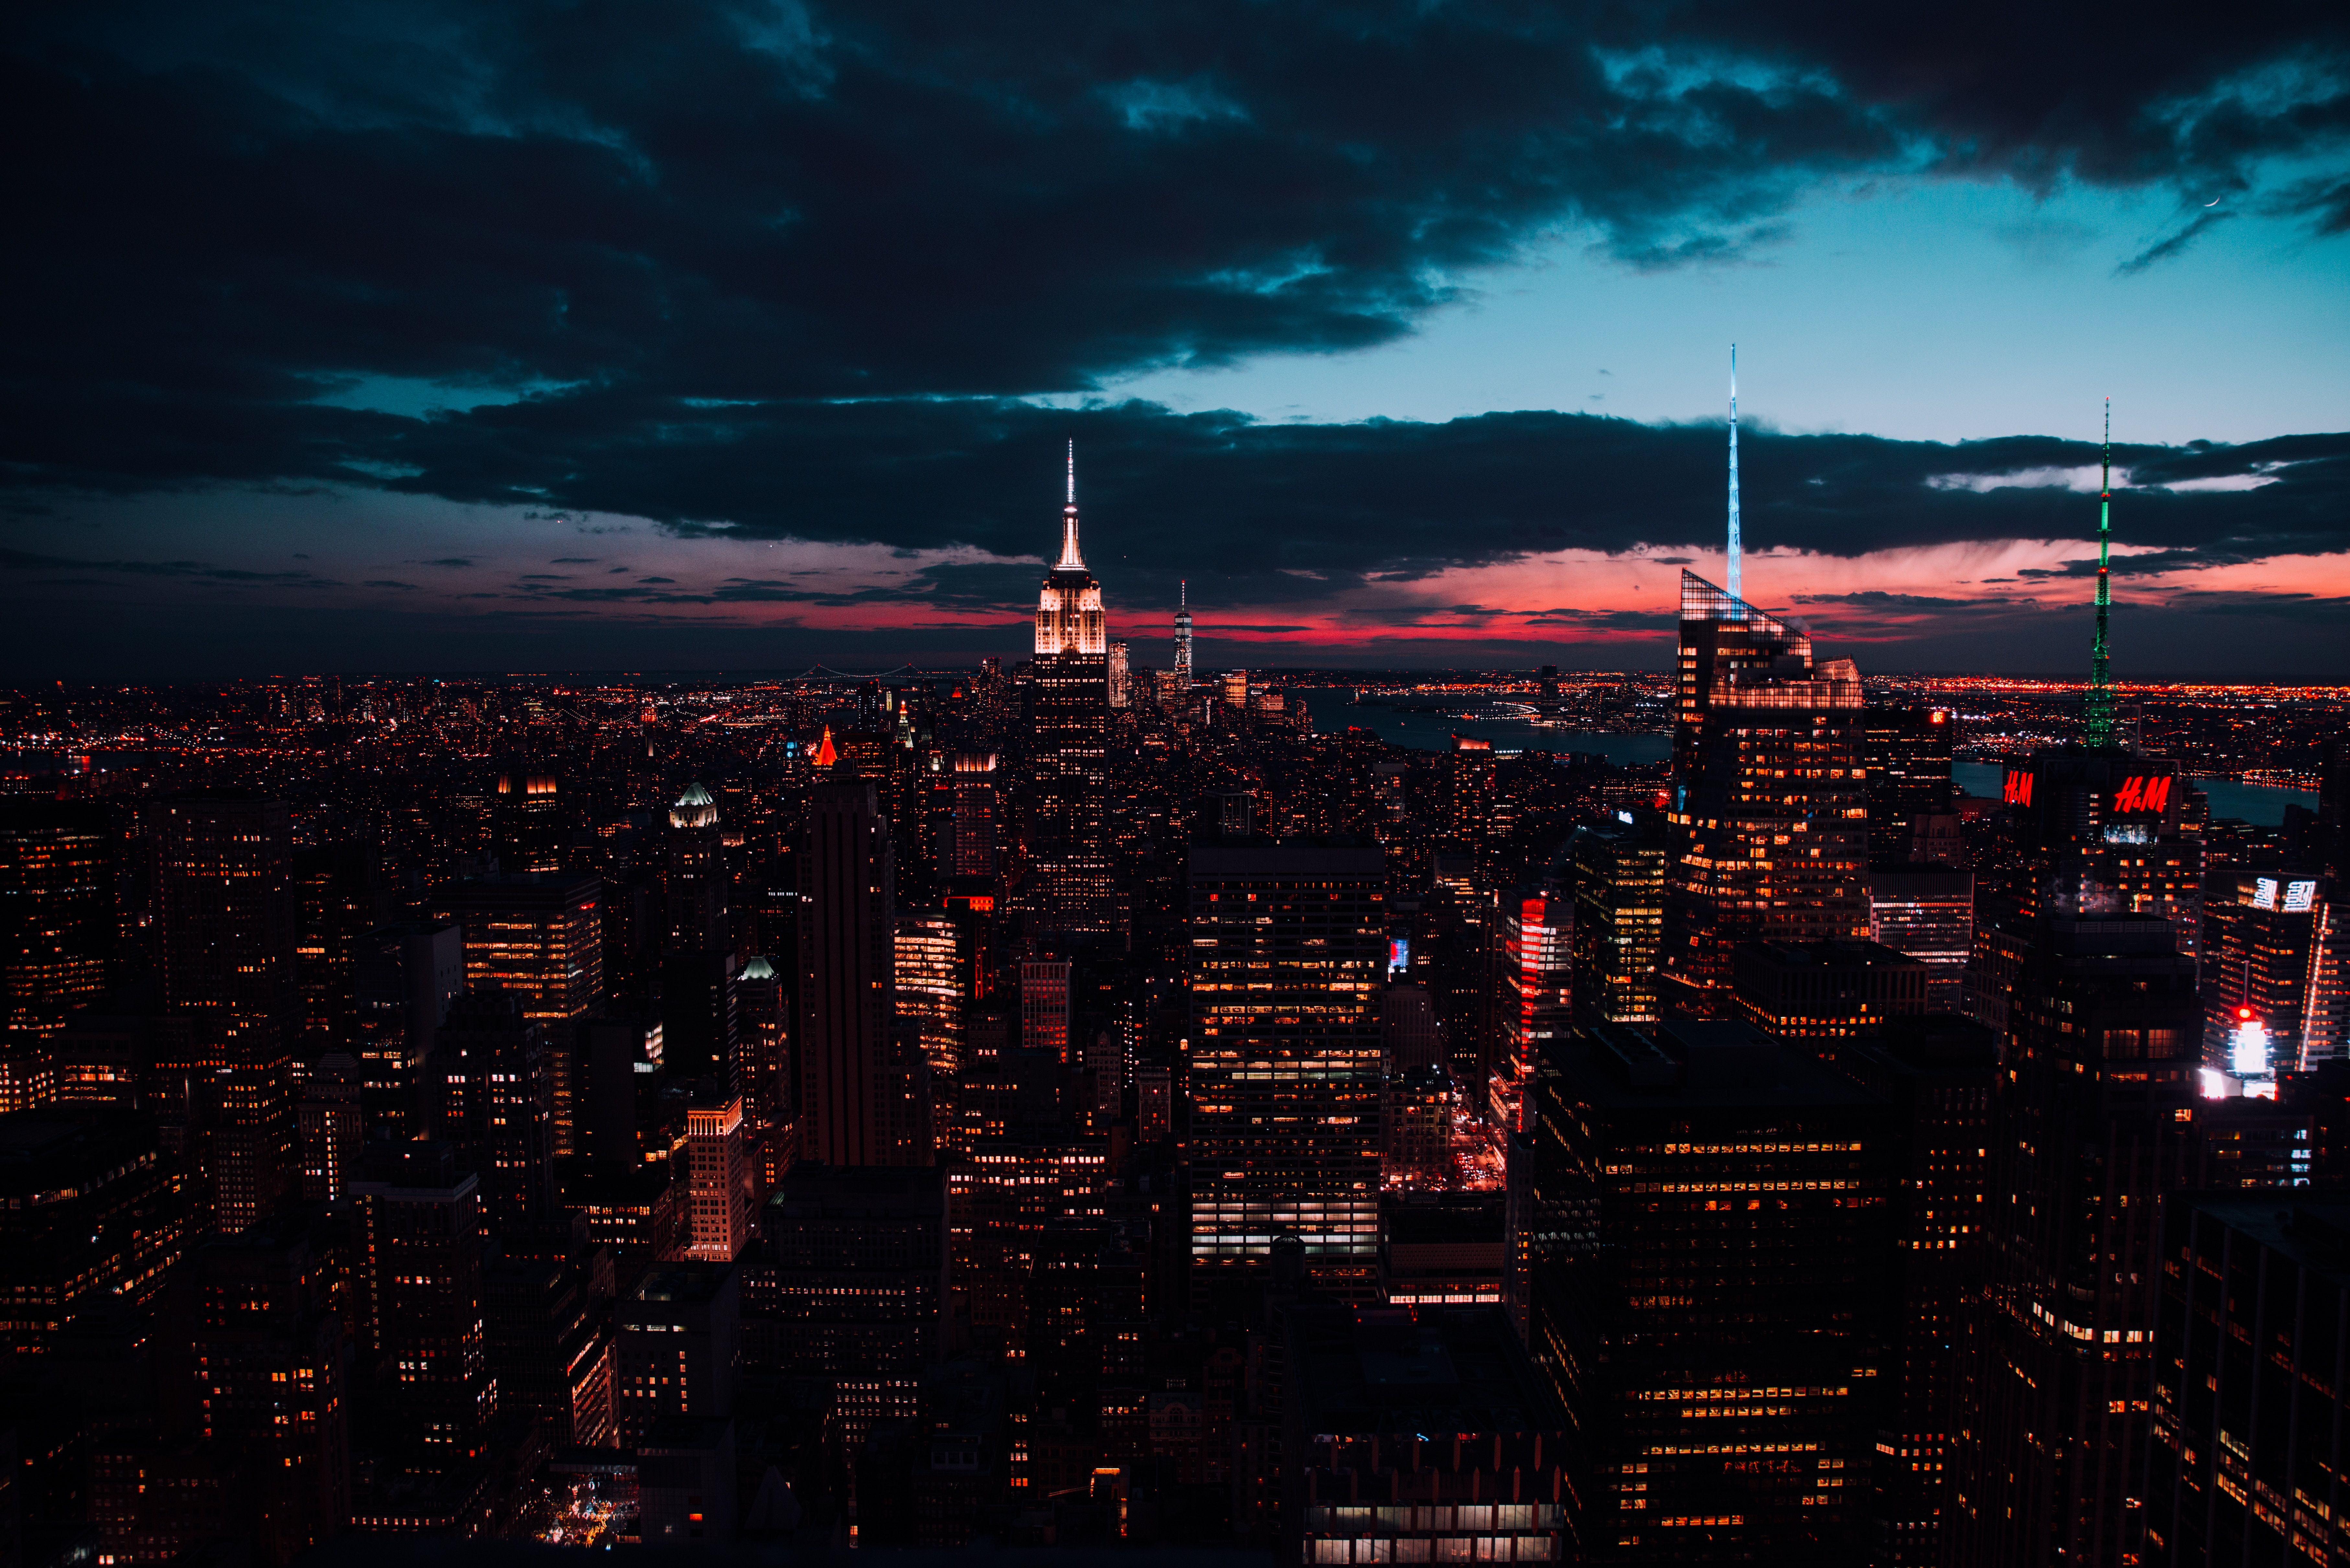 7254x4841 #building, #cool background, #new york, #city, #united states of america, #background, #landscape, #steeple, #tumblr background, #architecture, #spire, #tower, #aerial view, #Free picture, #outdoors, # wallpaper, #urban, #nature